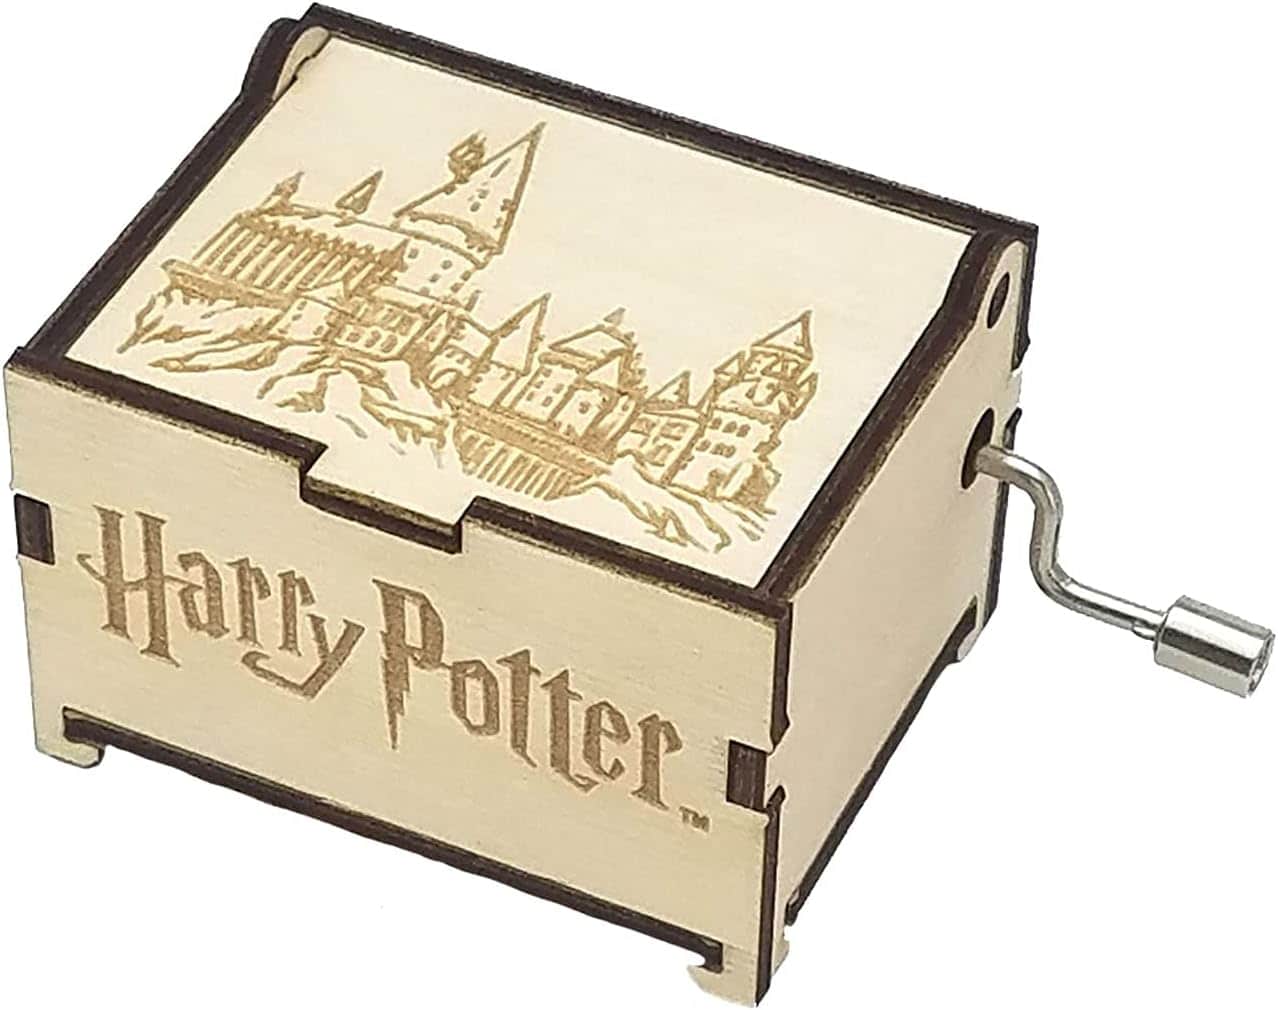 Buy Uzoid Harry Potter Merchandise Accessories (Combo of 1 Mug, 1 Keychain  and 4 Badges) Perfect Merch for Gifts for All Harry Potter Fans Out There  Online at Low Prices in India - Amazon.in